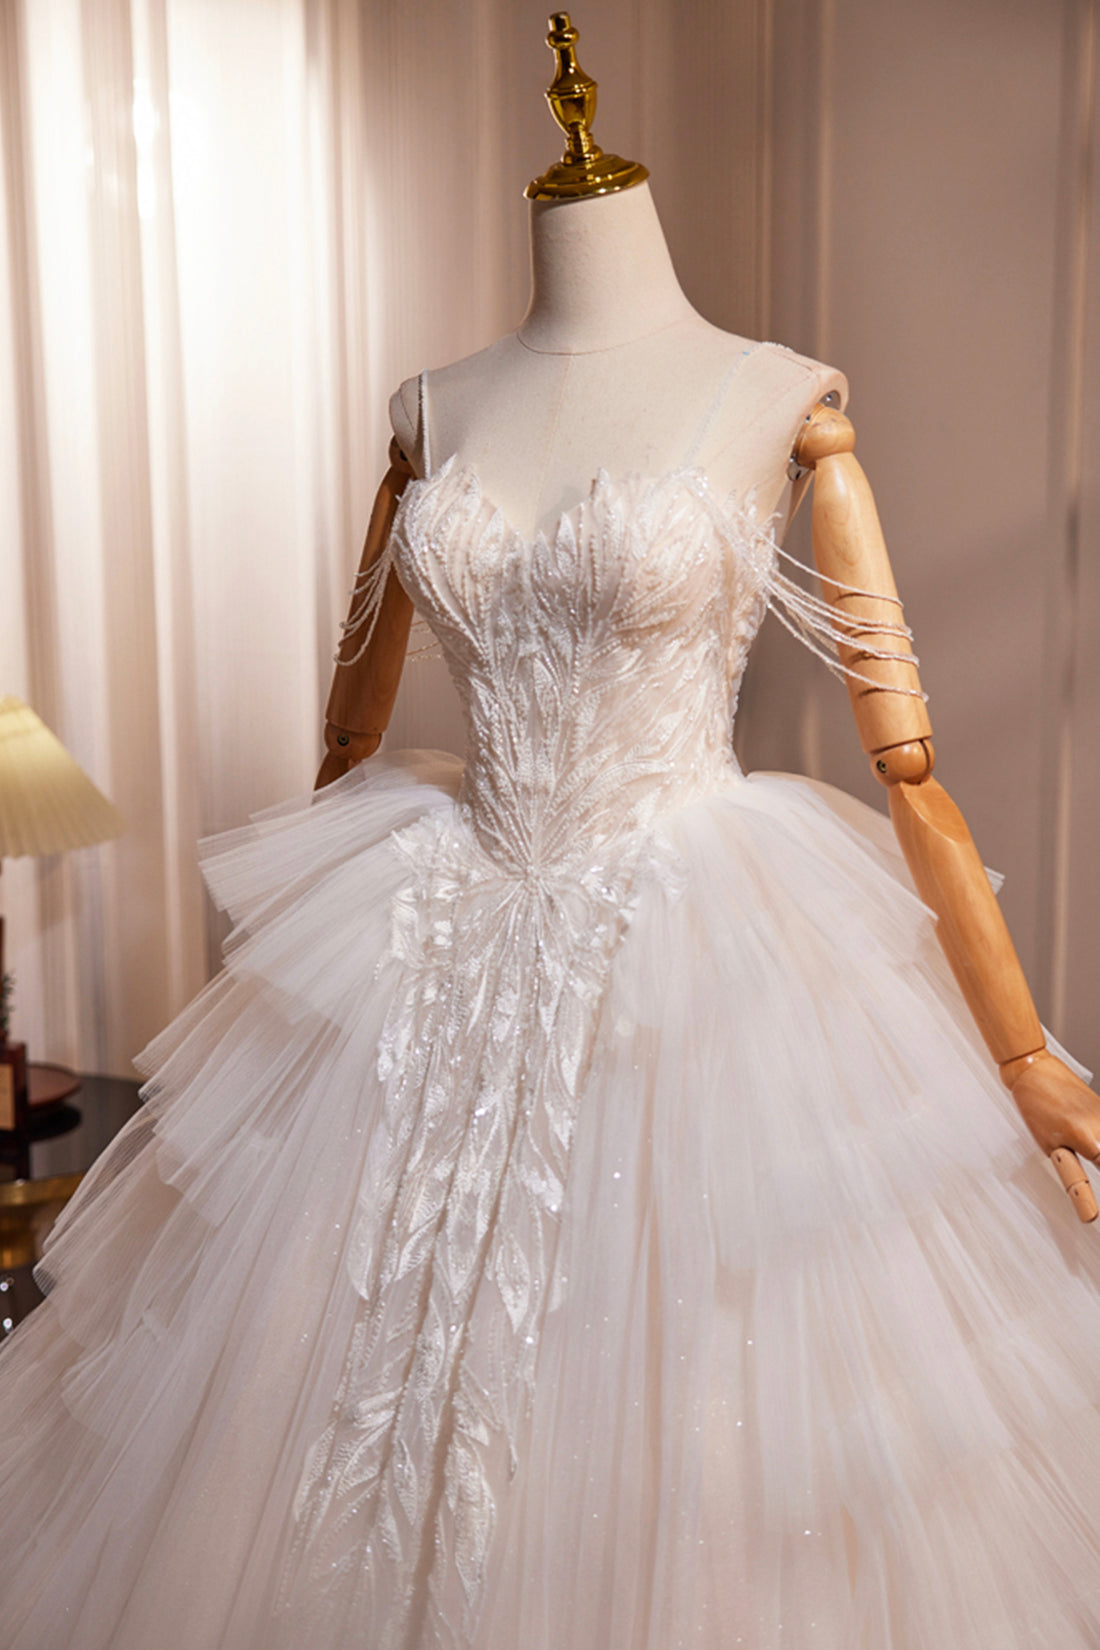 Champagne Sweetheart Layers Princess Dress, Beautiful Spaghetti Straps Tulle Formal Gown